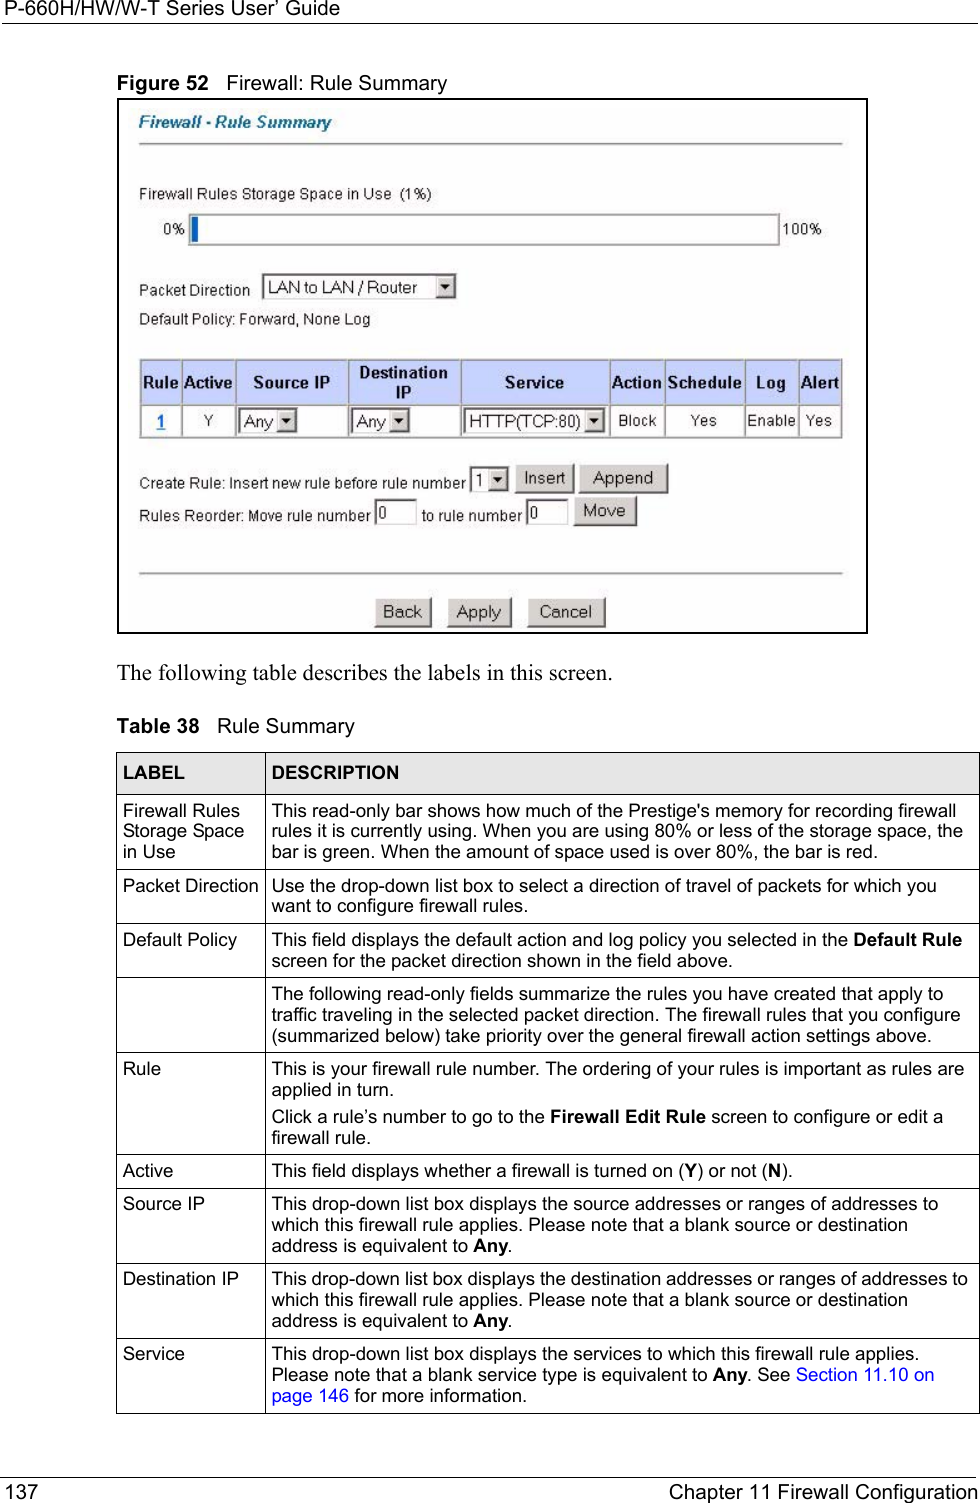 P-660H/HW/W-T Series User’ Guide137 Chapter 11 Firewall ConfigurationFigure 52   Firewall: Rule Summary The following table describes the labels in this screen.  Table 38   Rule SummaryLABEL DESCRIPTIONFirewall Rules Storage Space in UseThis read-only bar shows how much of the Prestige&apos;s memory for recording firewall rules it is currently using. When you are using 80% or less of the storage space, the bar is green. When the amount of space used is over 80%, the bar is red.Packet Direction Use the drop-down list box to select a direction of travel of packets for which you want to configure firewall rules.Default Policy This field displays the default action and log policy you selected in the Default Rule screen for the packet direction shown in the field above.The following read-only fields summarize the rules you have created that apply to traffic traveling in the selected packet direction. The firewall rules that you configure (summarized below) take priority over the general firewall action settings above.Rule This is your firewall rule number. The ordering of your rules is important as rules are applied in turn. Click a rule’s number to go to the Firewall Edit Rule screen to configure or edit a firewall rule.Active This field displays whether a firewall is turned on (Y) or not (N). Source IP This drop-down list box displays the source addresses or ranges of addresses to which this firewall rule applies. Please note that a blank source or destination address is equivalent to Any.Destination IP This drop-down list box displays the destination addresses or ranges of addresses to which this firewall rule applies. Please note that a blank source or destination address is equivalent to Any.Service  This drop-down list box displays the services to which this firewall rule applies. Please note that a blank service type is equivalent to Any. See Section 11.10 on page 146 for more information.